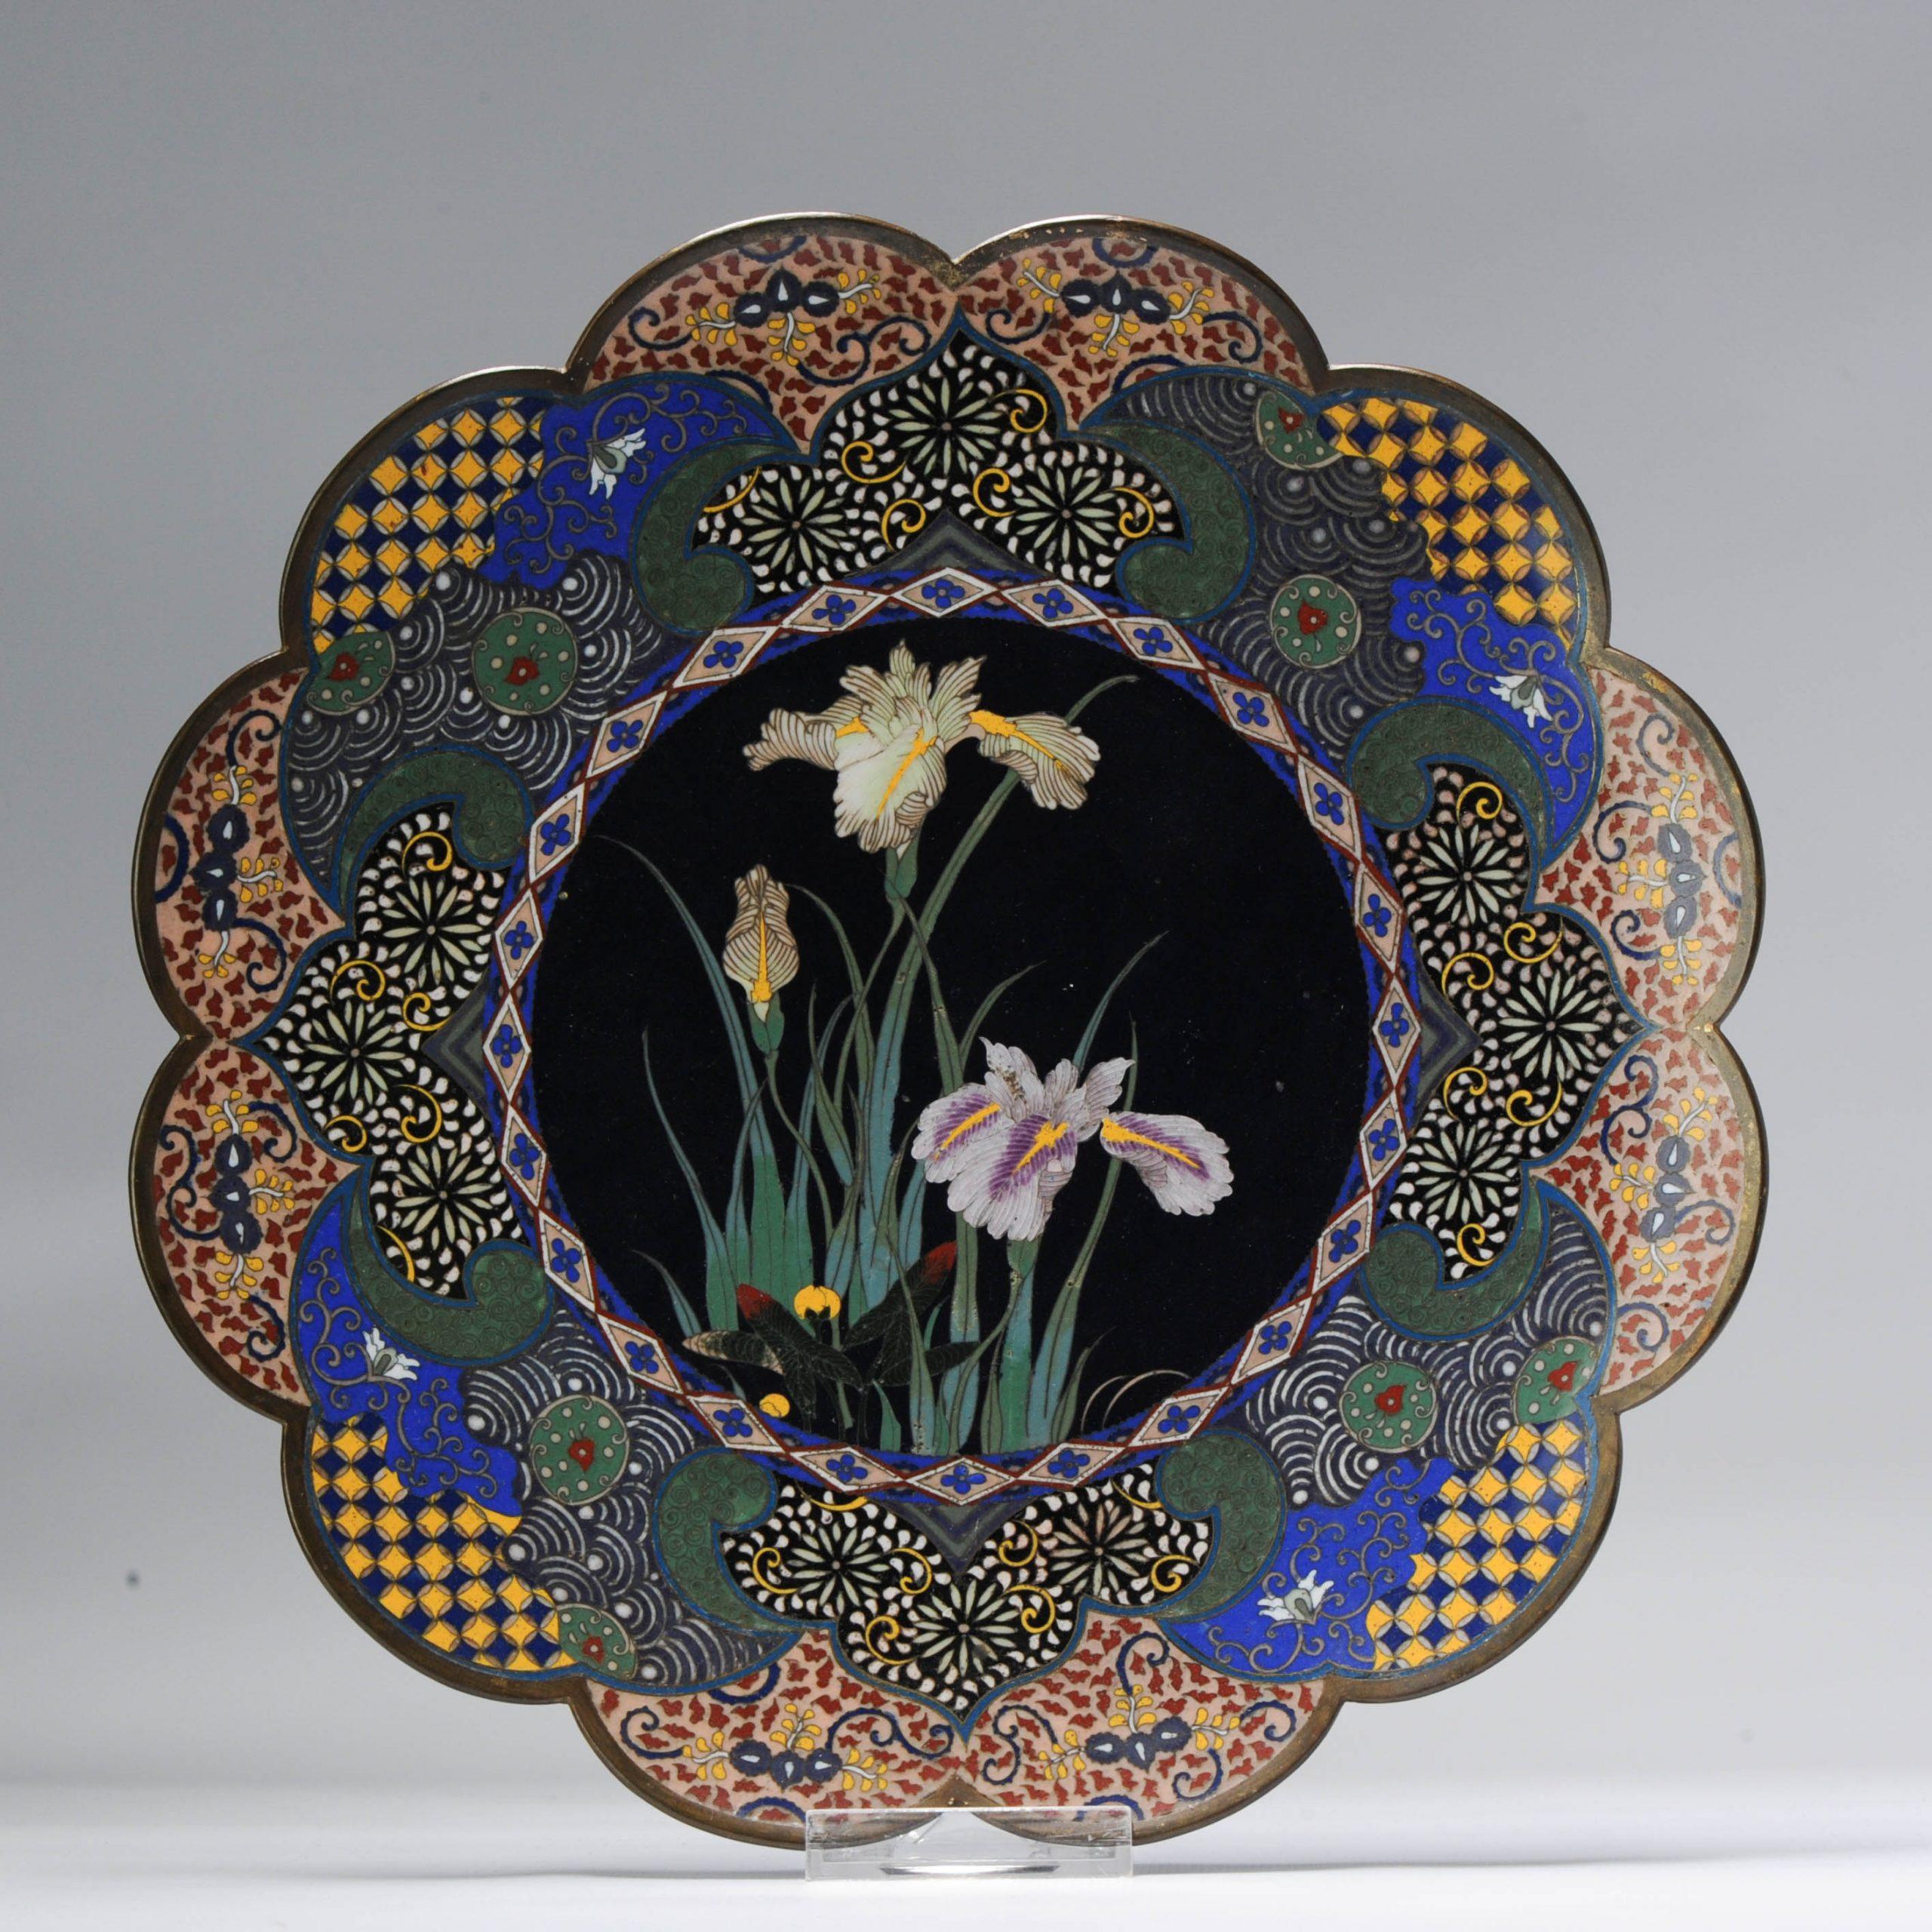 Description

Lovely and beautifully made piece.

Provenance:

Originally part of the Catherina collection of Japanese bronzes and cloisonne that was partly auctioned in Amsterdam in 2006 at Sothebys. Some pieces are pictured in the catalogue